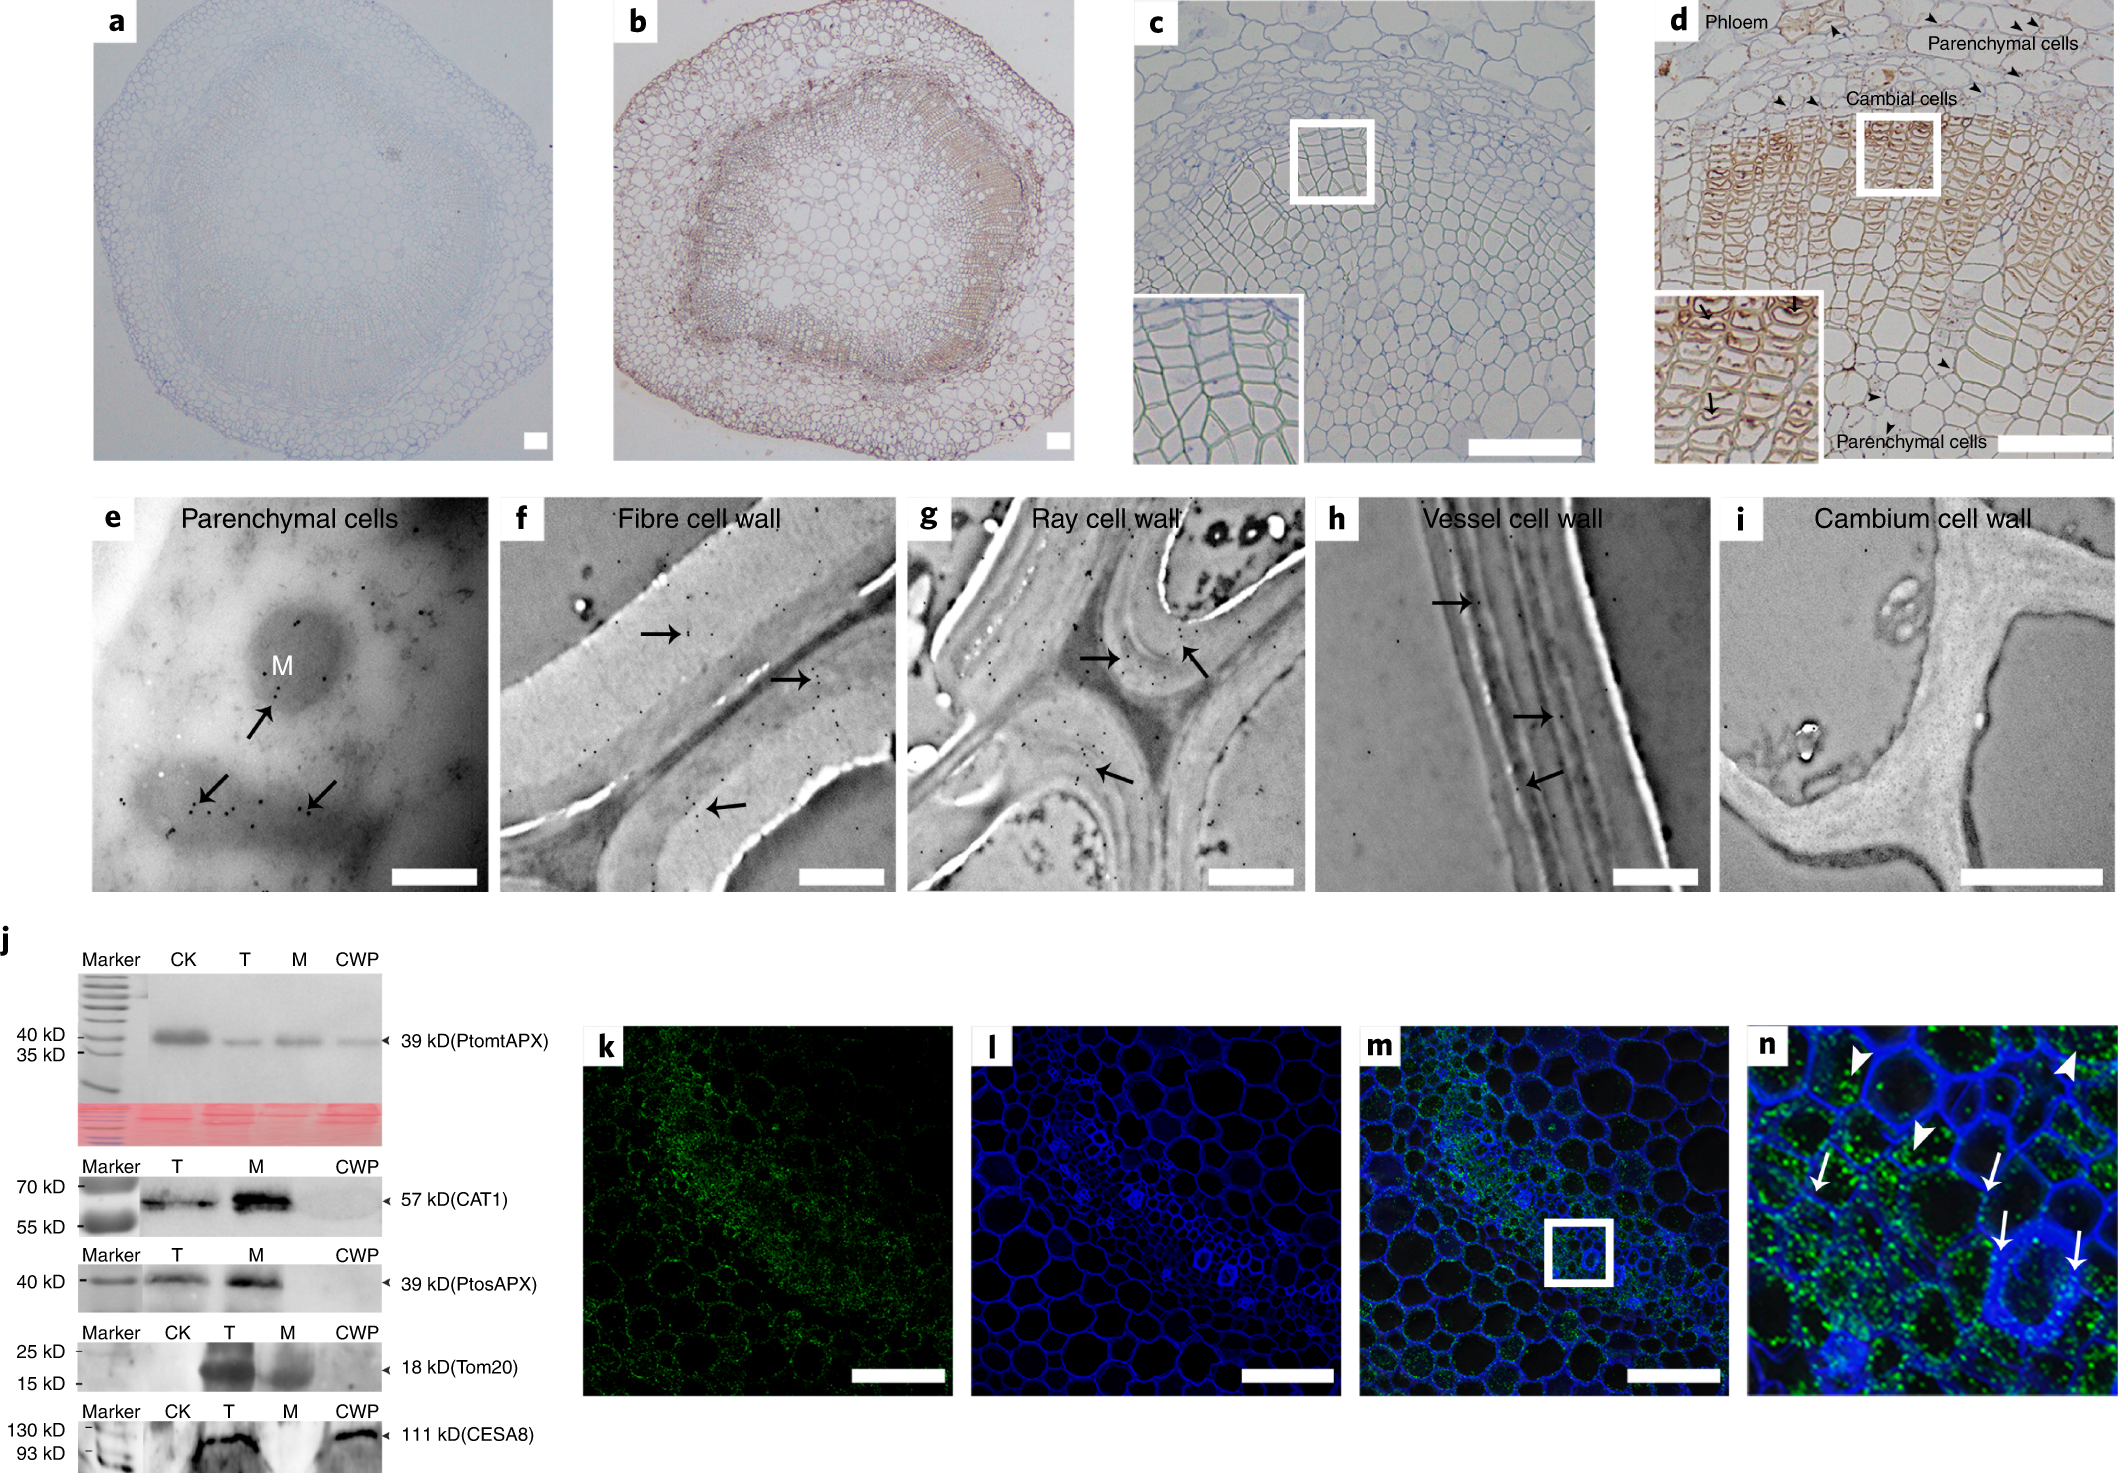 PtomtAPX is an autonomous lignification peroxidase during the earliest  stage of secondary wall formation in Populus tomentosa Carr | Nature Plants